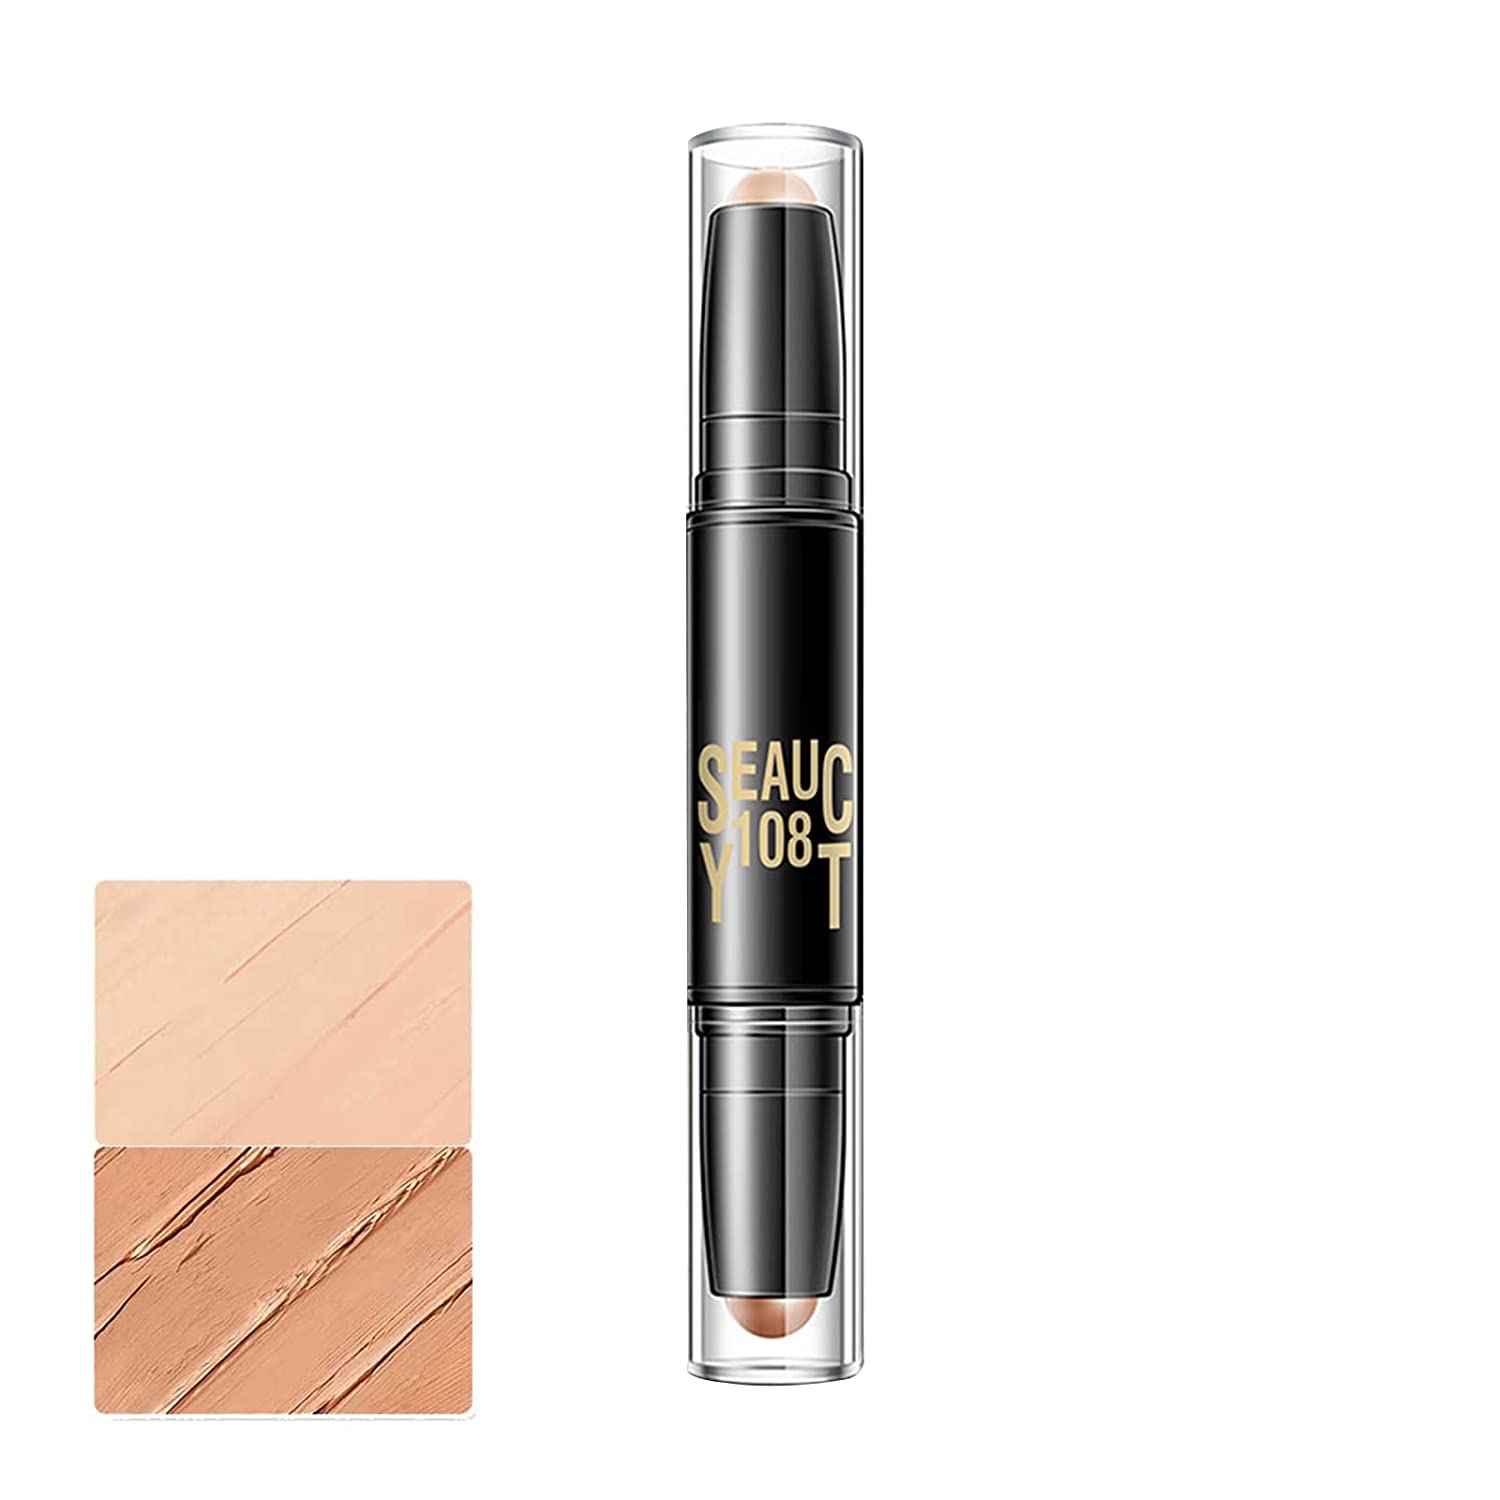 topjess Face Highlighter Sticks, Concealer, Concealer Contour, Contour Pen, Contour Pen Highlighter, Contouring and Highlighter in One for Long-Lasting Contours and Perfect Coverage